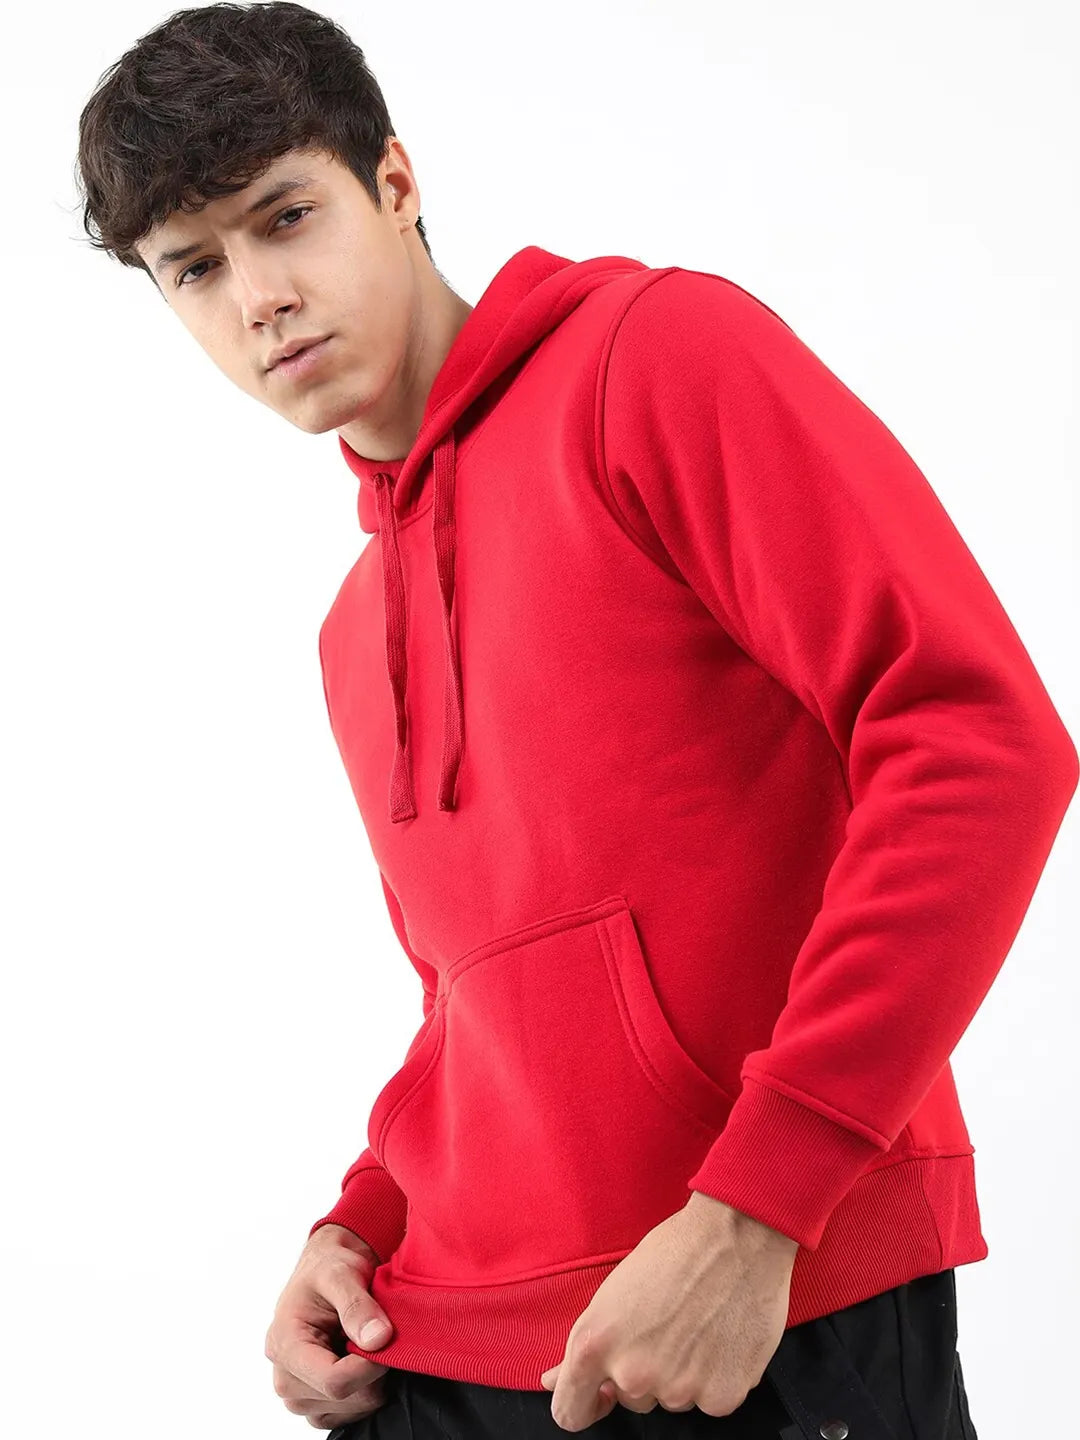 For Men and Women (Unisex) Hoodie Red Color Full Sleeves